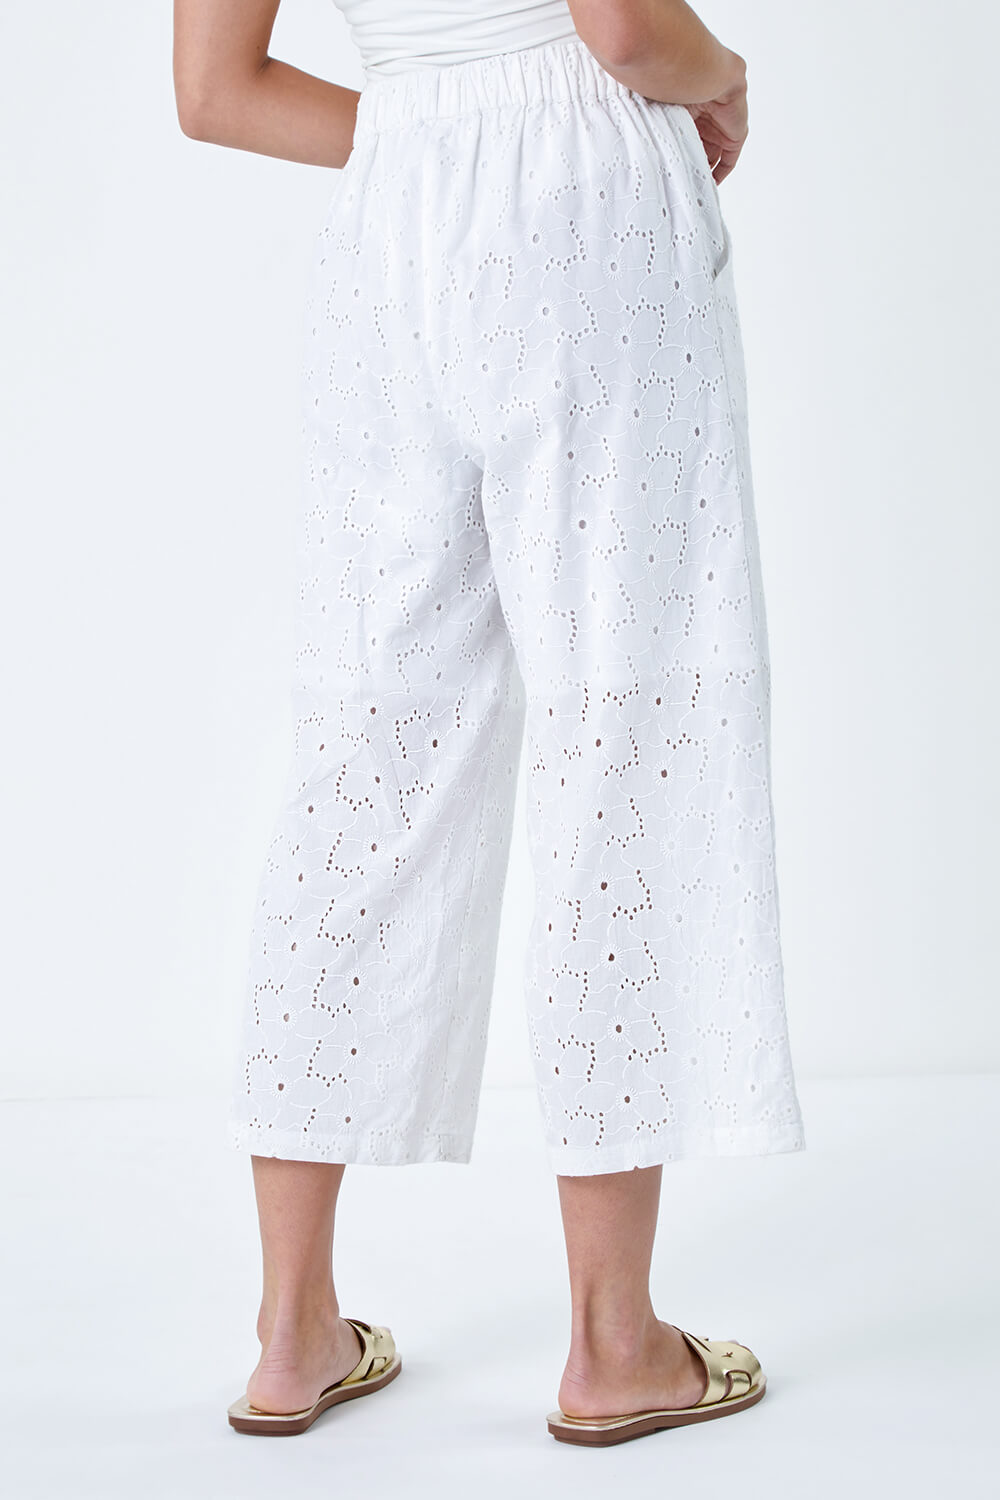 White Petite Cotton Broderie Culotte Trousers, Image 3 of 5